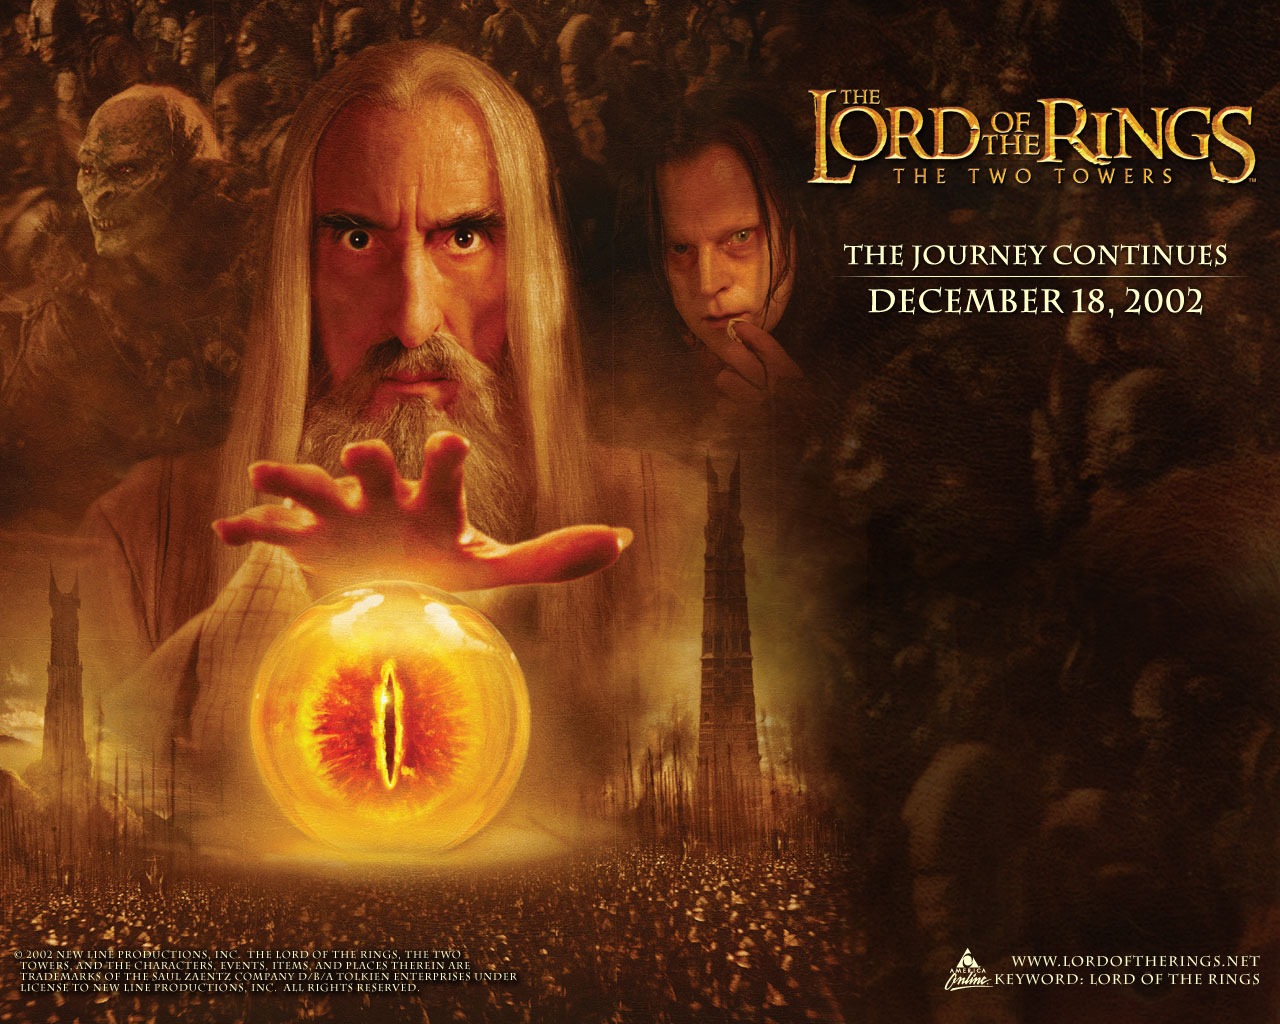 The Lord of the Rings wallpaper #3 - 1280x1024